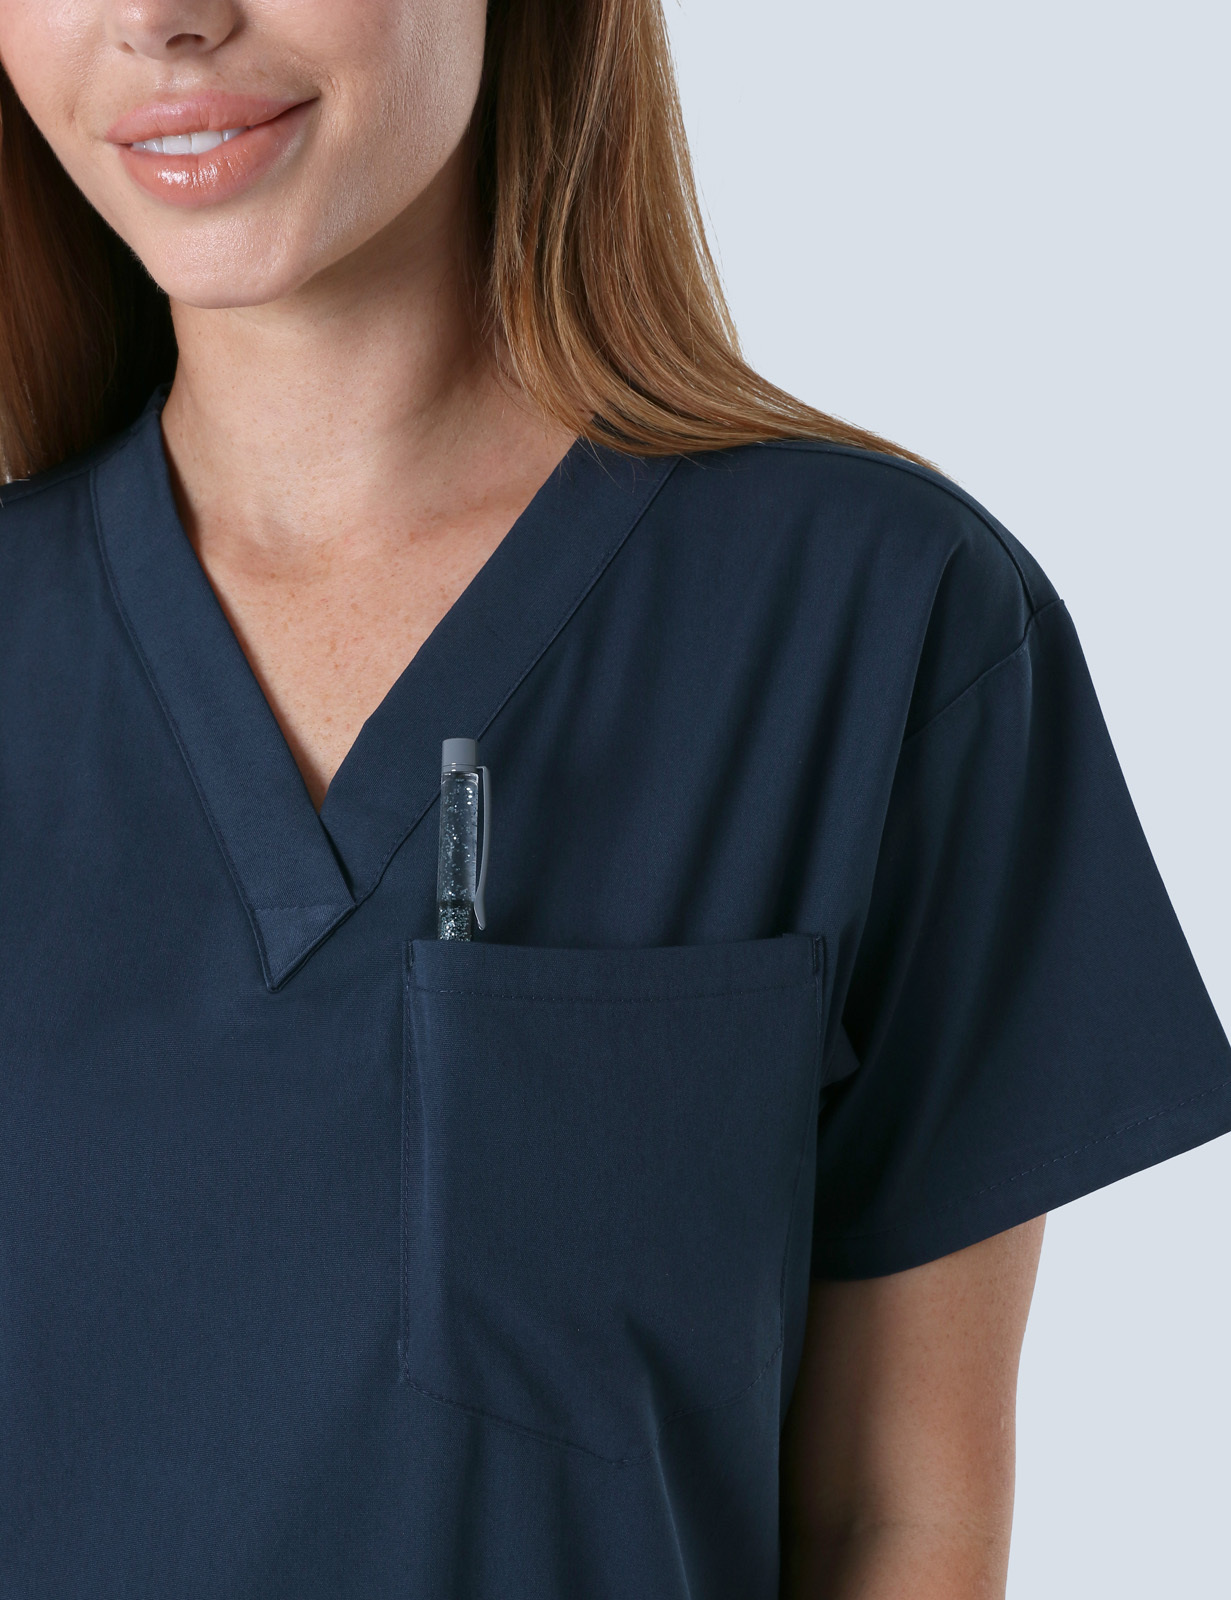 Toowoomba Hospital - Critical Care RN (4 Pocket Scrub Top and Cargo Pants in Navy incl Logos)